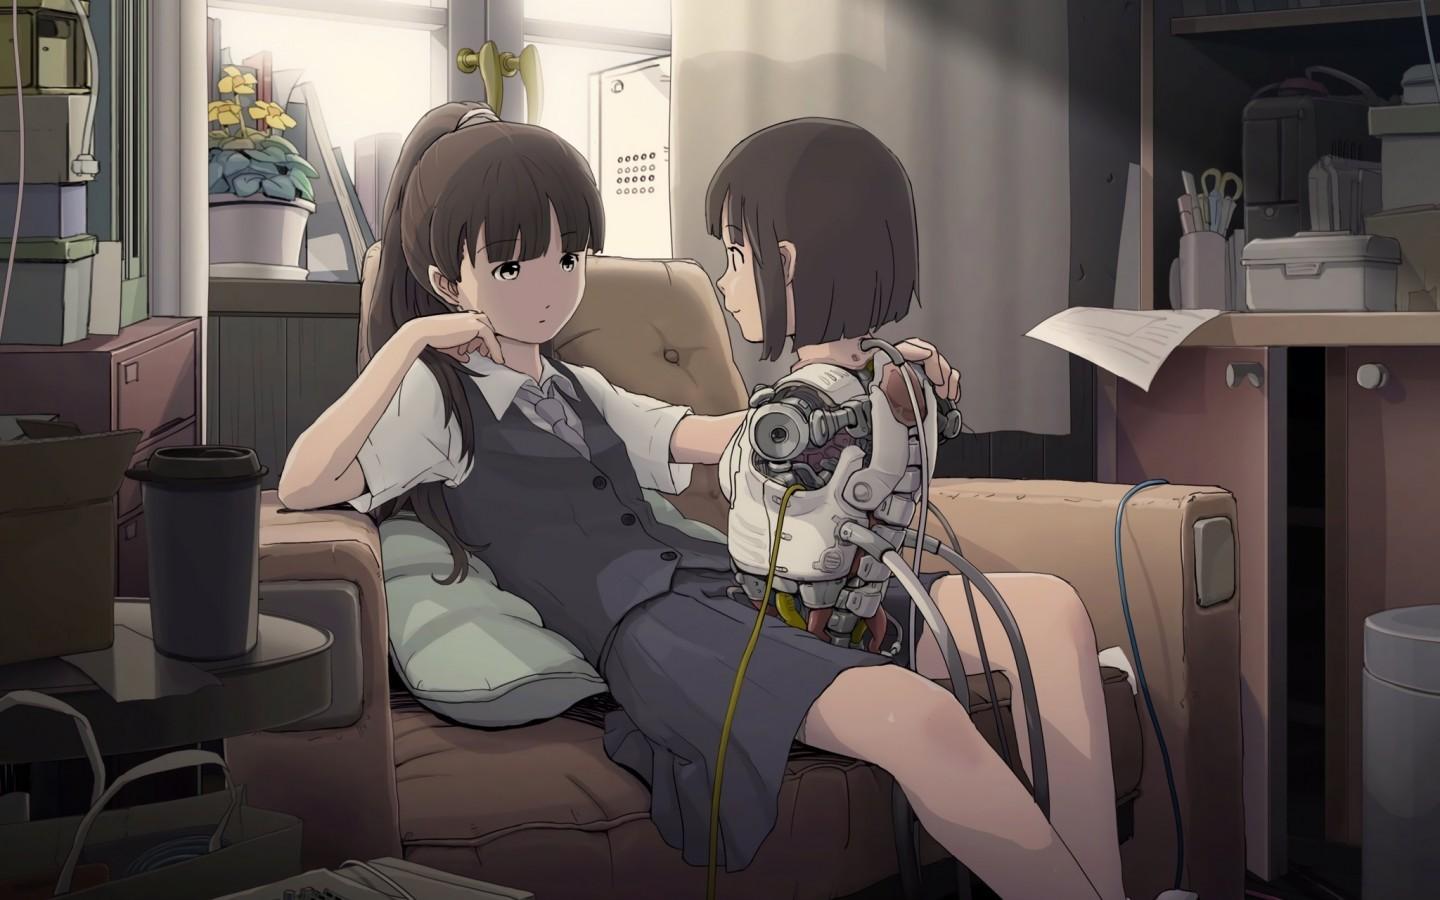 Download 1440x900 Anime Girl, Cyborg, Couch, Brown Hair, Sci